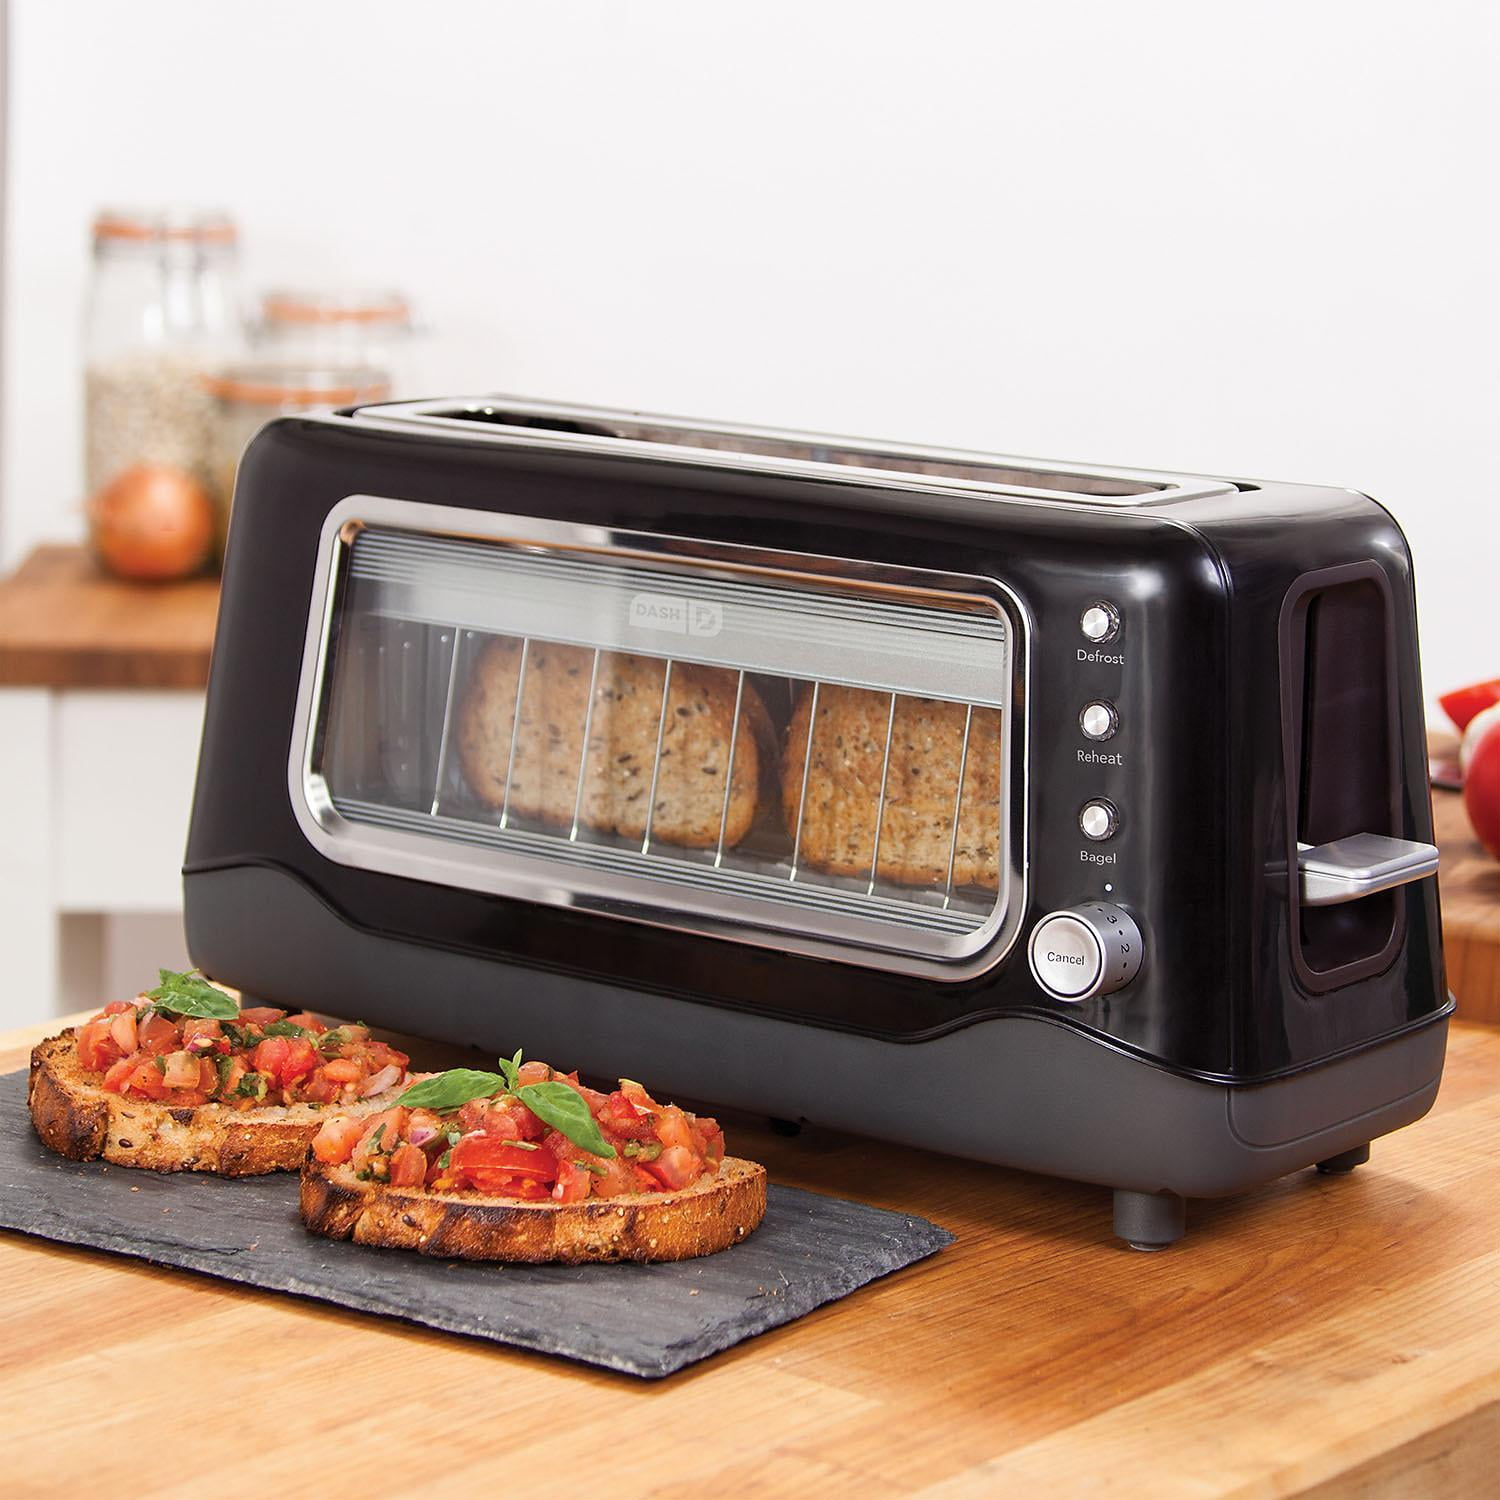  DASH Clear View Toaster: Extra Wide Slot Toaster with See  Through Window - Defrost, Reheat + Auto Shut Off Feature for Bagels,  Specialty Breads & other Baked Goods - Black: Home